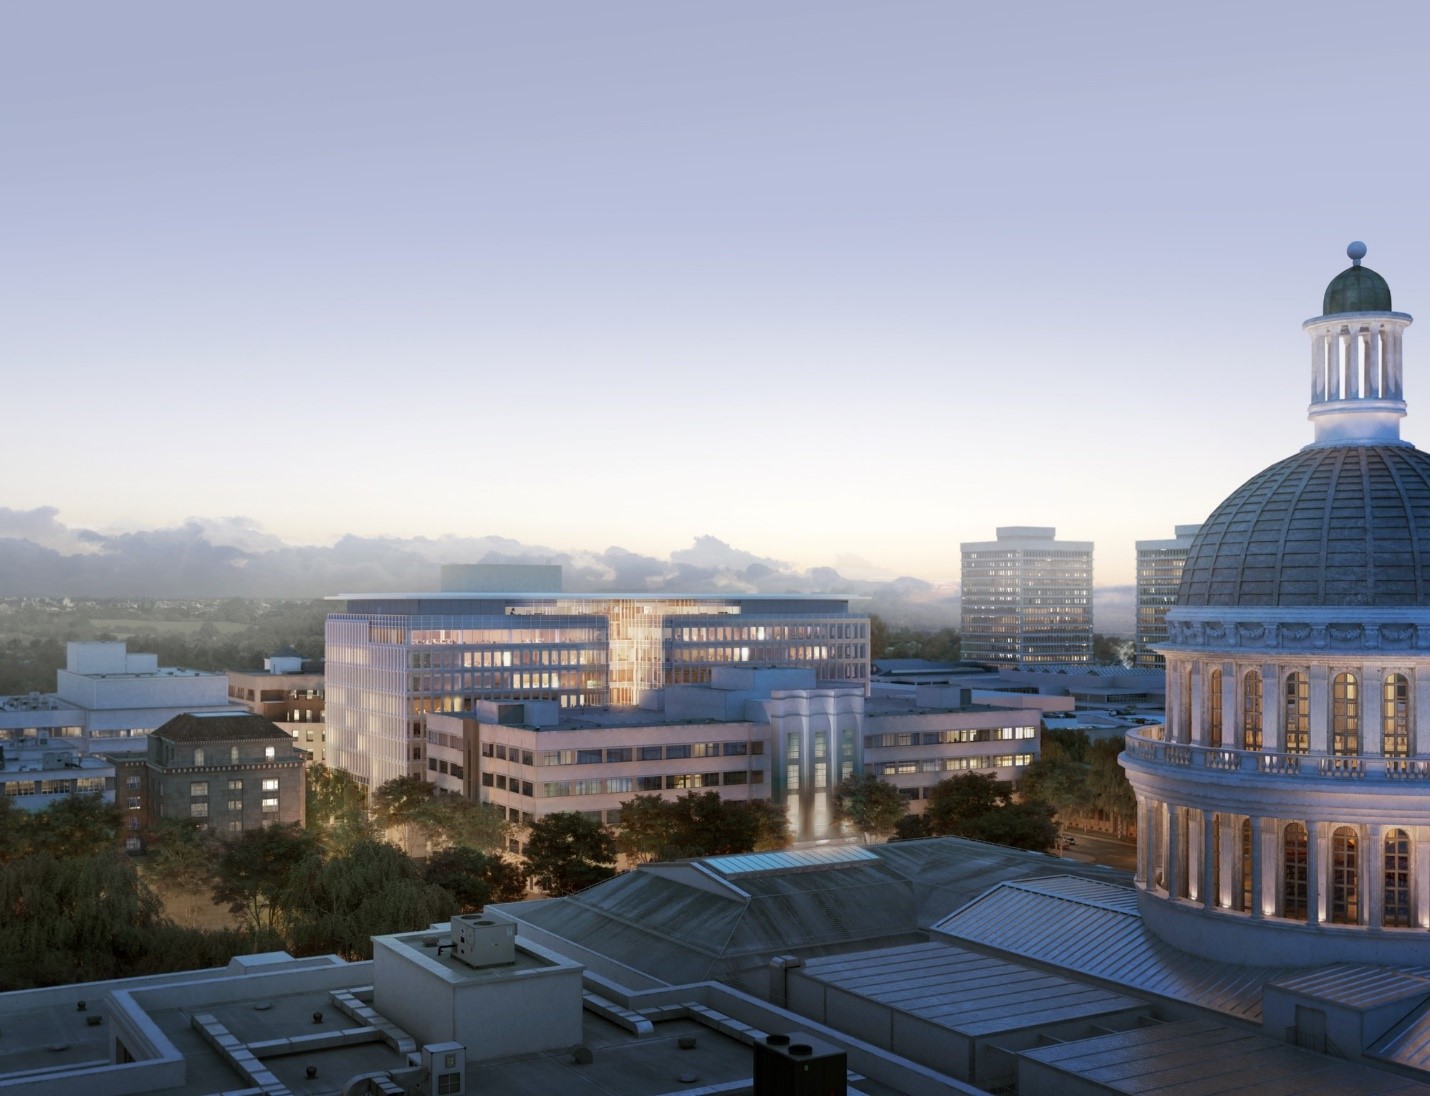 View of Rendering from the State Capitol